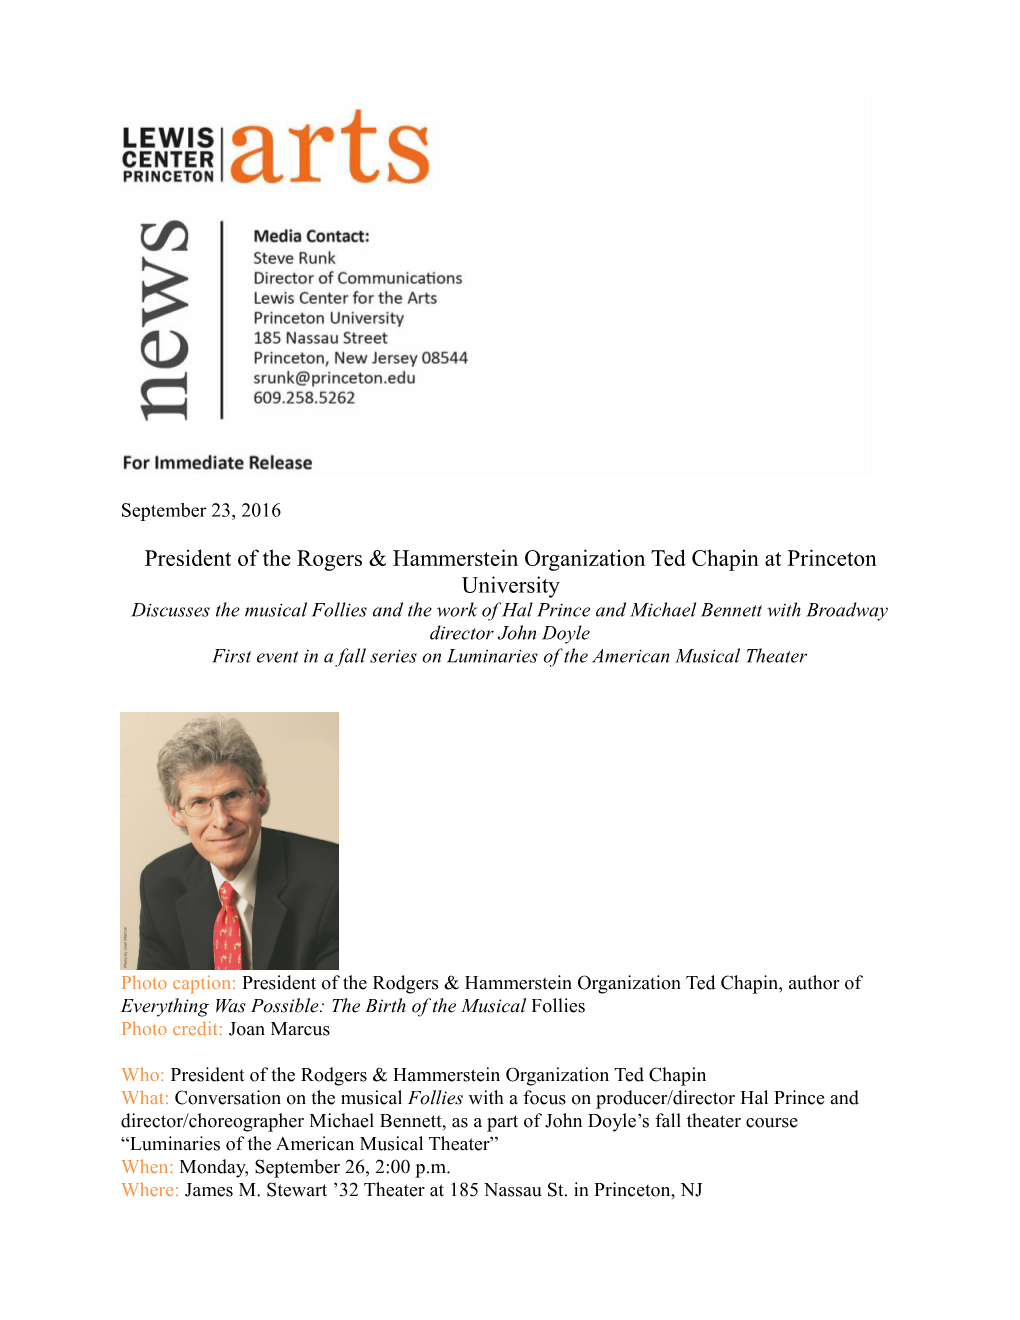 President of the Rogers & Hammerstein Organization Ted Chapin at Princeton University